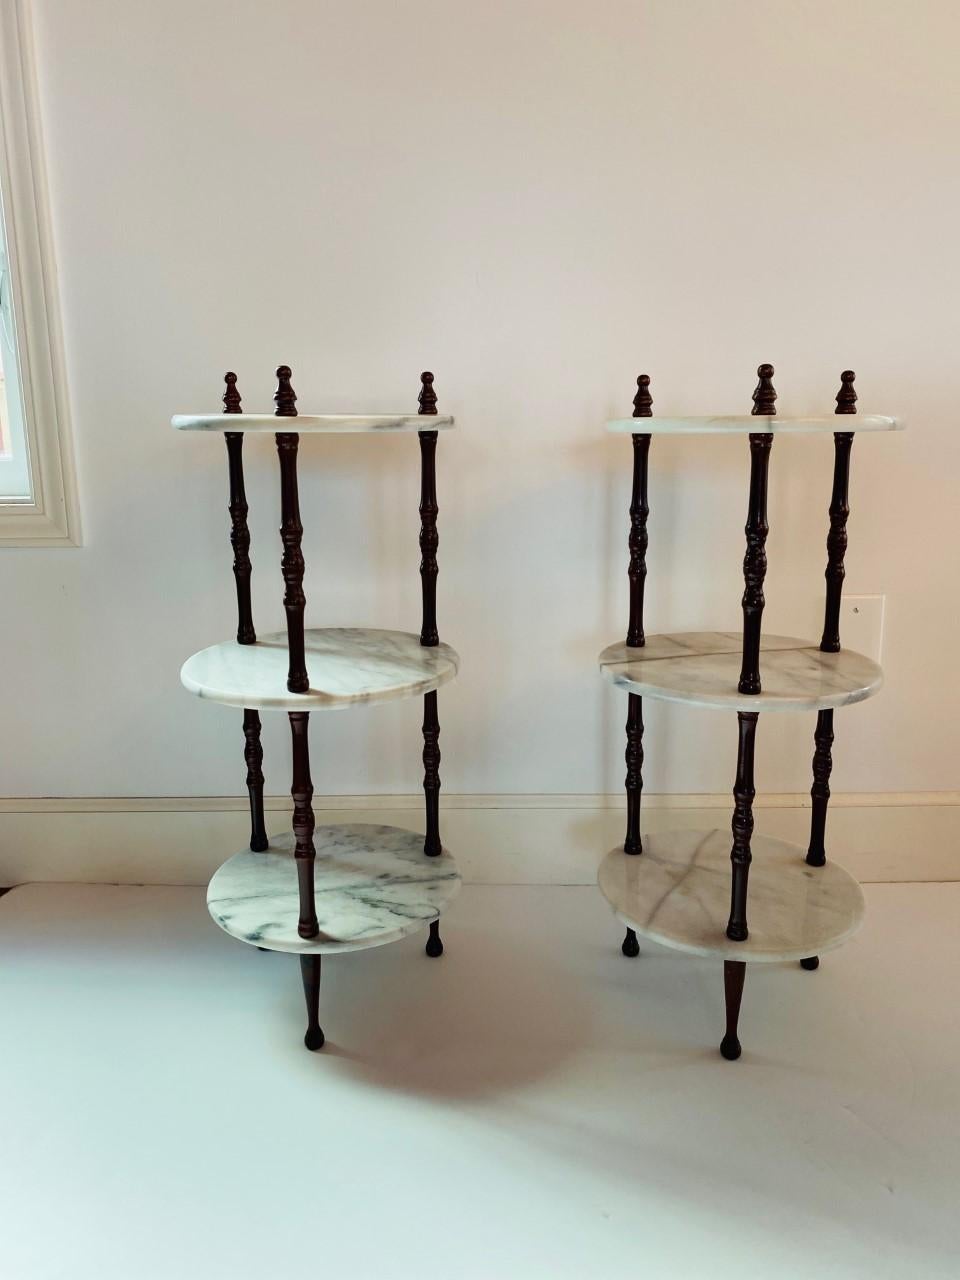 Beautiful pair of 3-tier tables stand. Versatile piece that works with your decor or for accessories or plants. Each presents 3 marble discs entwined within 3 wooden long legs. Classic but unexpected and stylish.